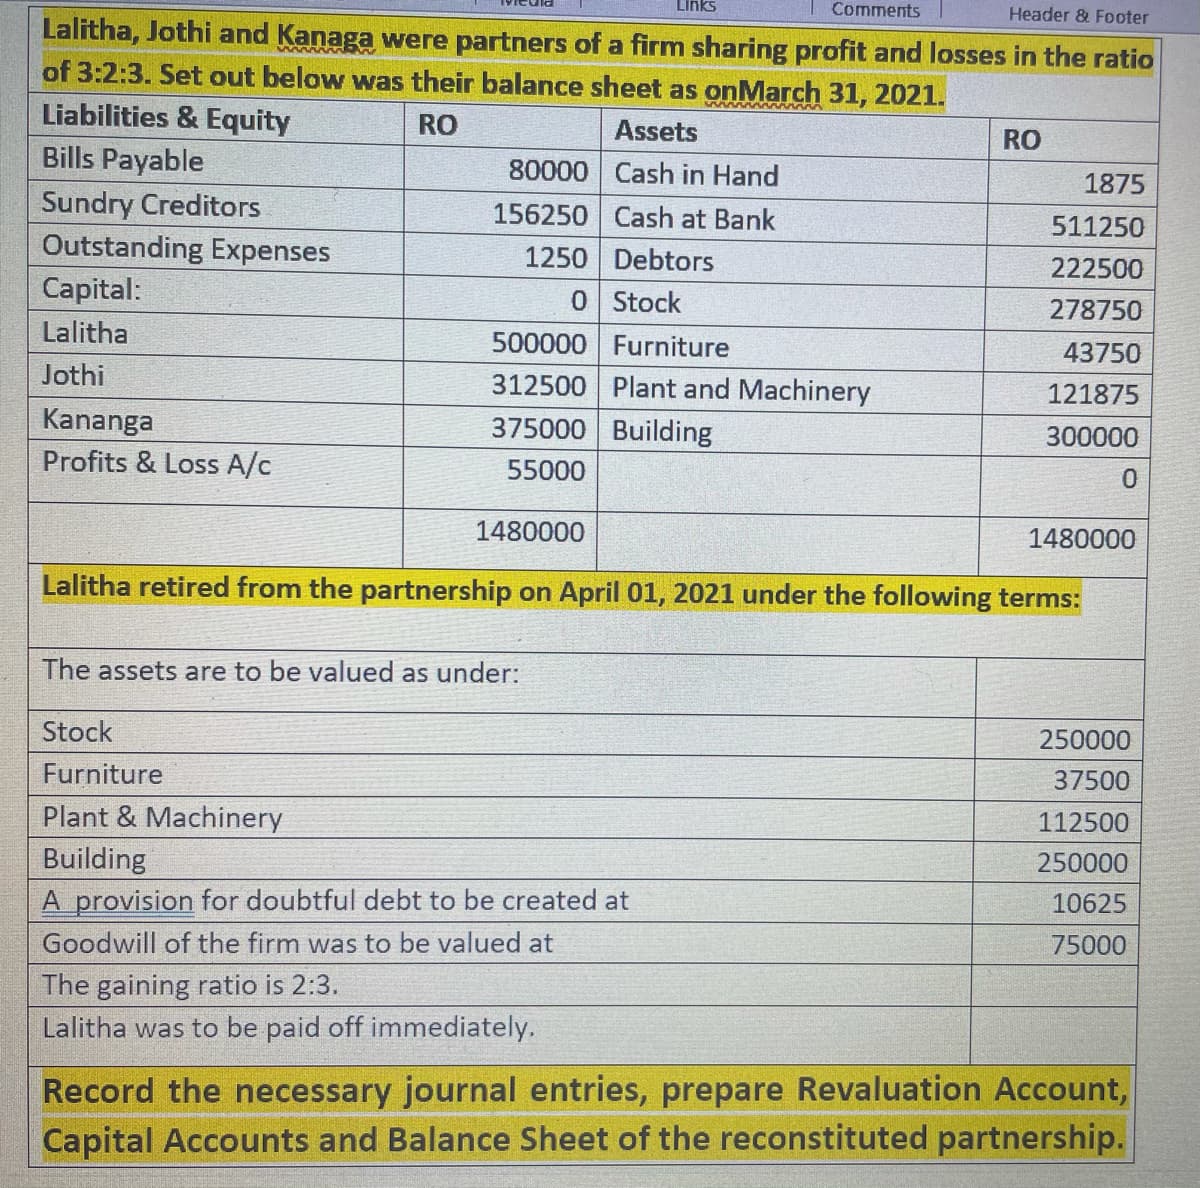 Links
Comments
Header & Footer
Lalitha, Jothi and Kanaga were partners of a firm sharing profit and losses in the ratio
of 3:2:3. Set out below was their balance sheet as onMarch 31, 2021.
Liabilities & Equity
RO
Assets
RO
Bills Payable
80000 Cash in Hand
1875
Sundry Creditors
Outstanding Expenses
156250 Cash at Bank
511250
1250 Debtors
222500
Capital:
0 Stock
500000 Furniture
312500 Plant and Machinery
375000 Building
278750
Lalitha
43750
Jothi
121875
Kananga
300000
Profits & Loss A/c
55000
1480000
1480000
Lalitha retired from the partnership on April 01, 2021 under the following terms:
The assets are to be valued as under:
Stock
250000
Furniture
37500
Plant & Machinery
112500
Building
A provision for doubtful debt to be created at
250000
10625
Goodwill of the firm was to be valued at
75000
The gaining ratio is 2:3.
Lalitha was to be paid off immediately.
Record the necessary journal entries, prepare Revaluation Account,
Capital Accounts and Balance Sheet of the reconstituted partnership.
